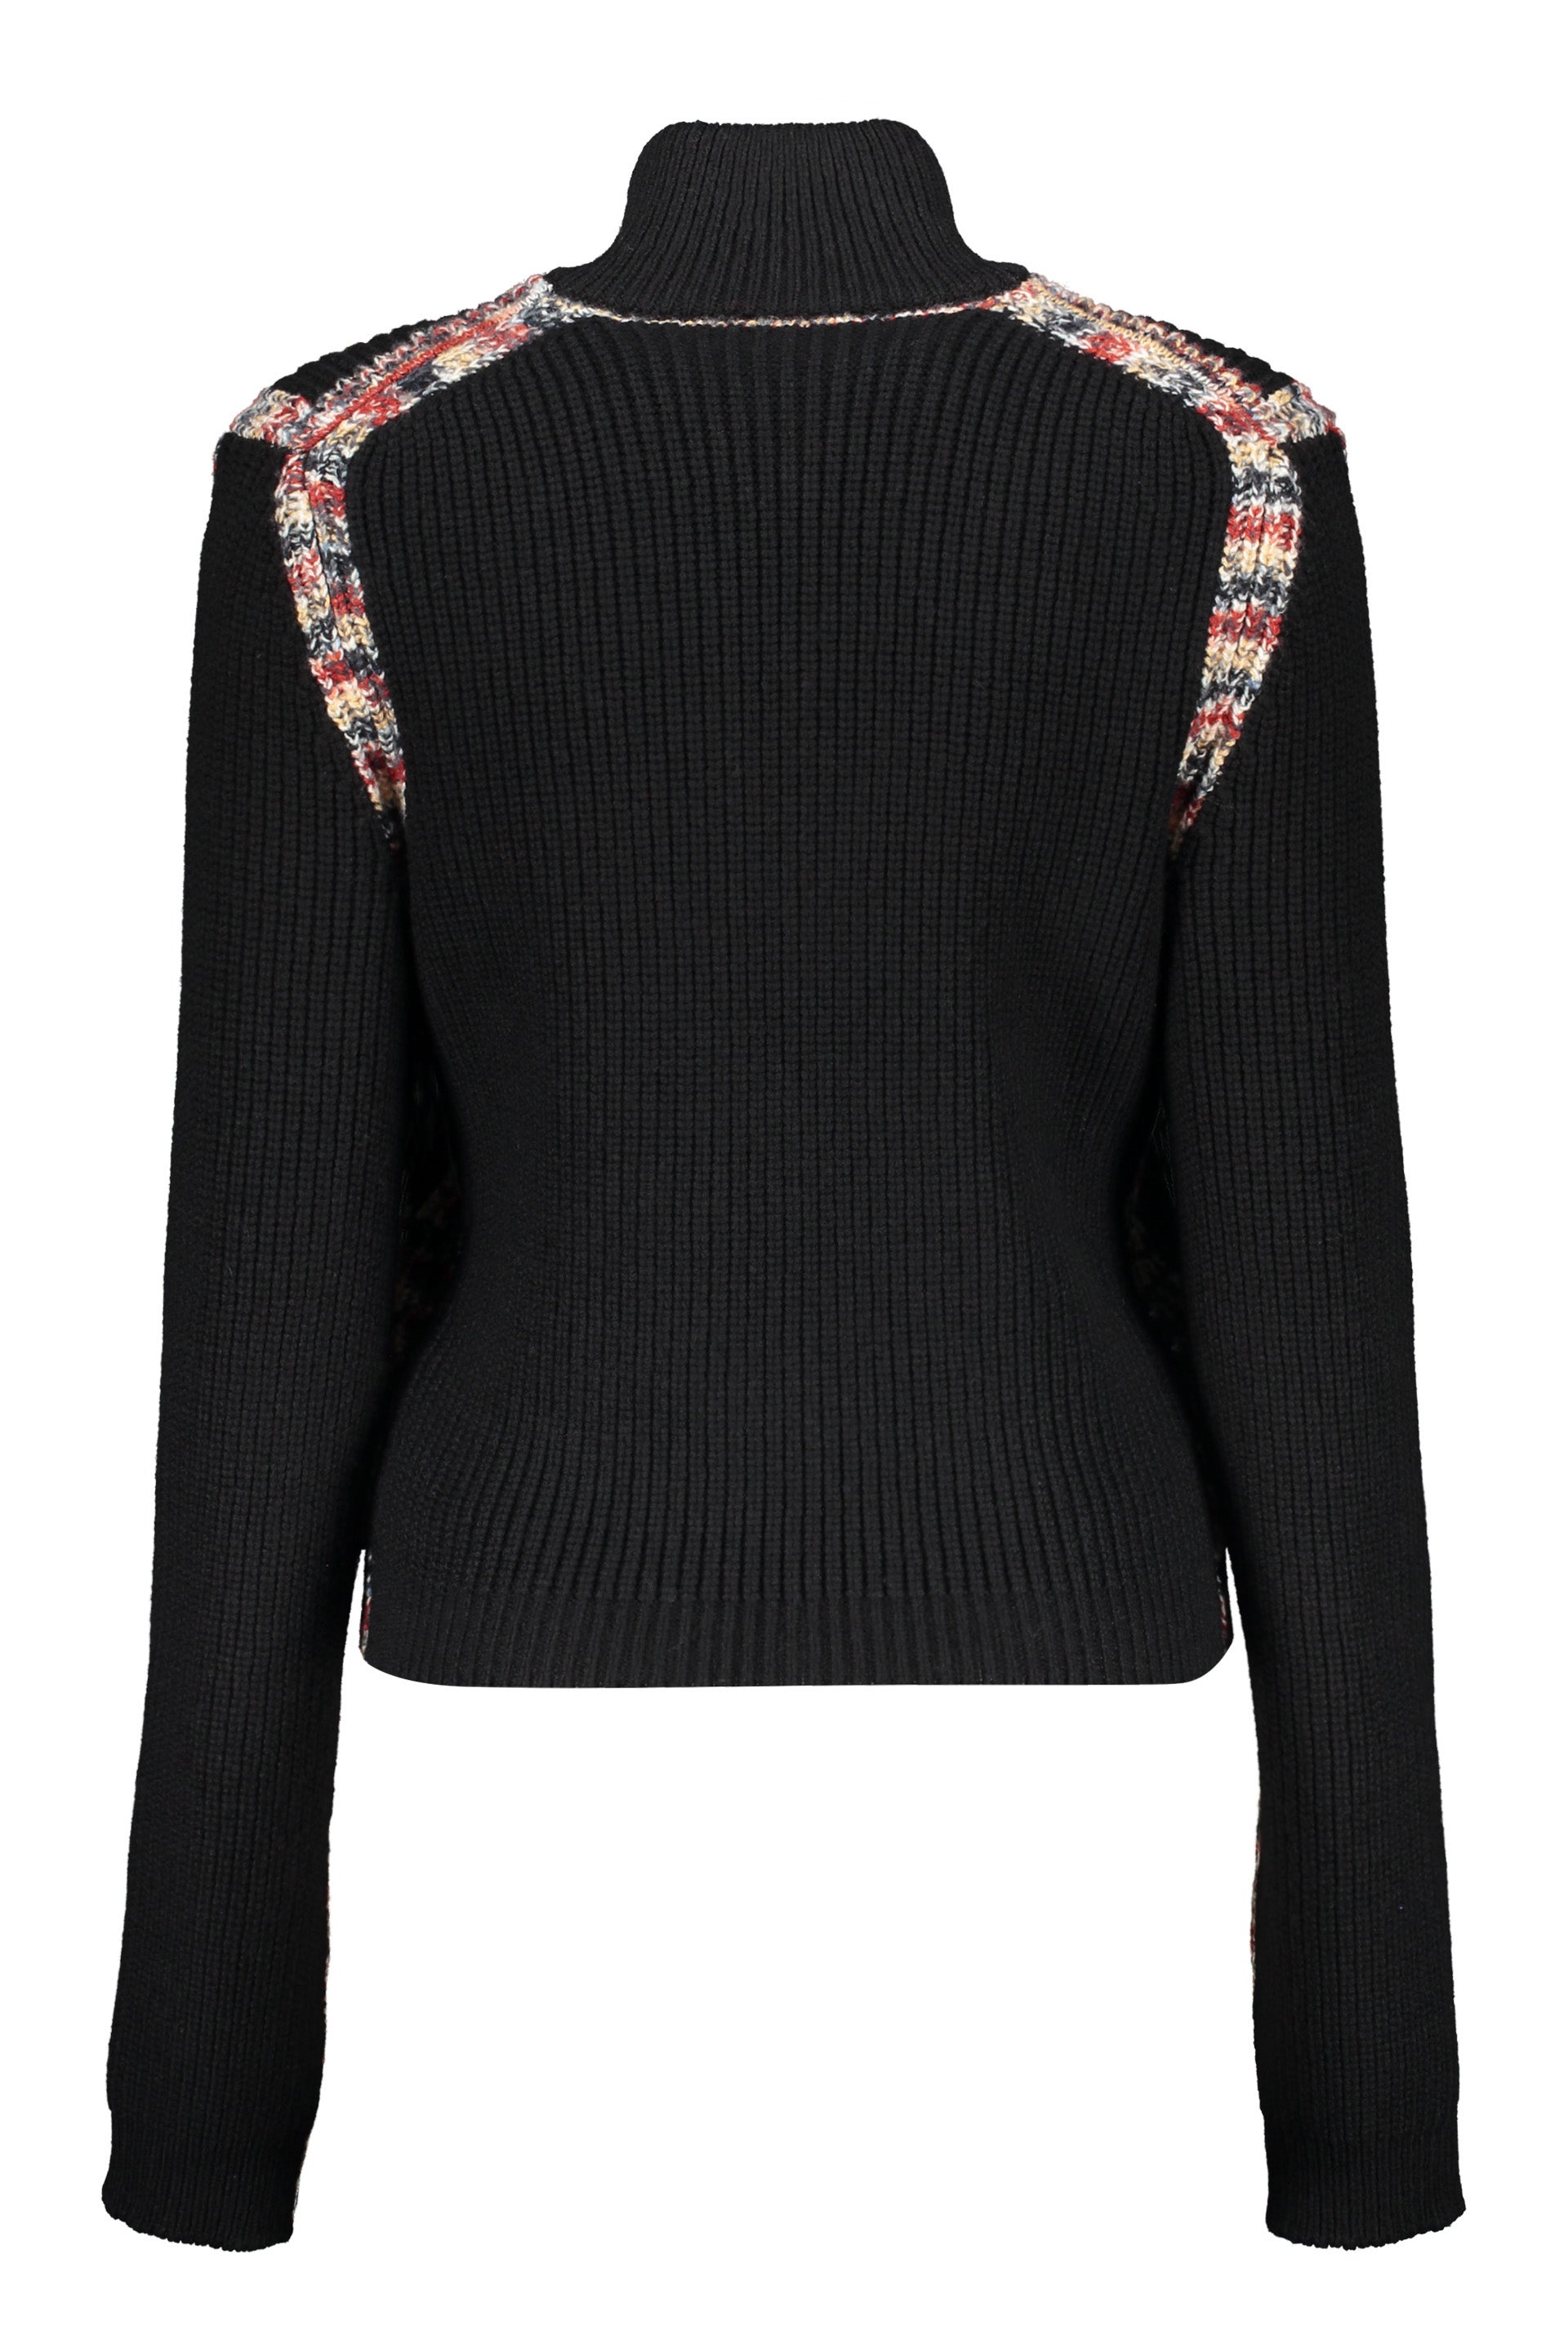 Missoni-OUTLET-SALE-Wool-stand-up-collar-sweater-Strick-40-ARCHIVE-COLLECTION-2.jpg